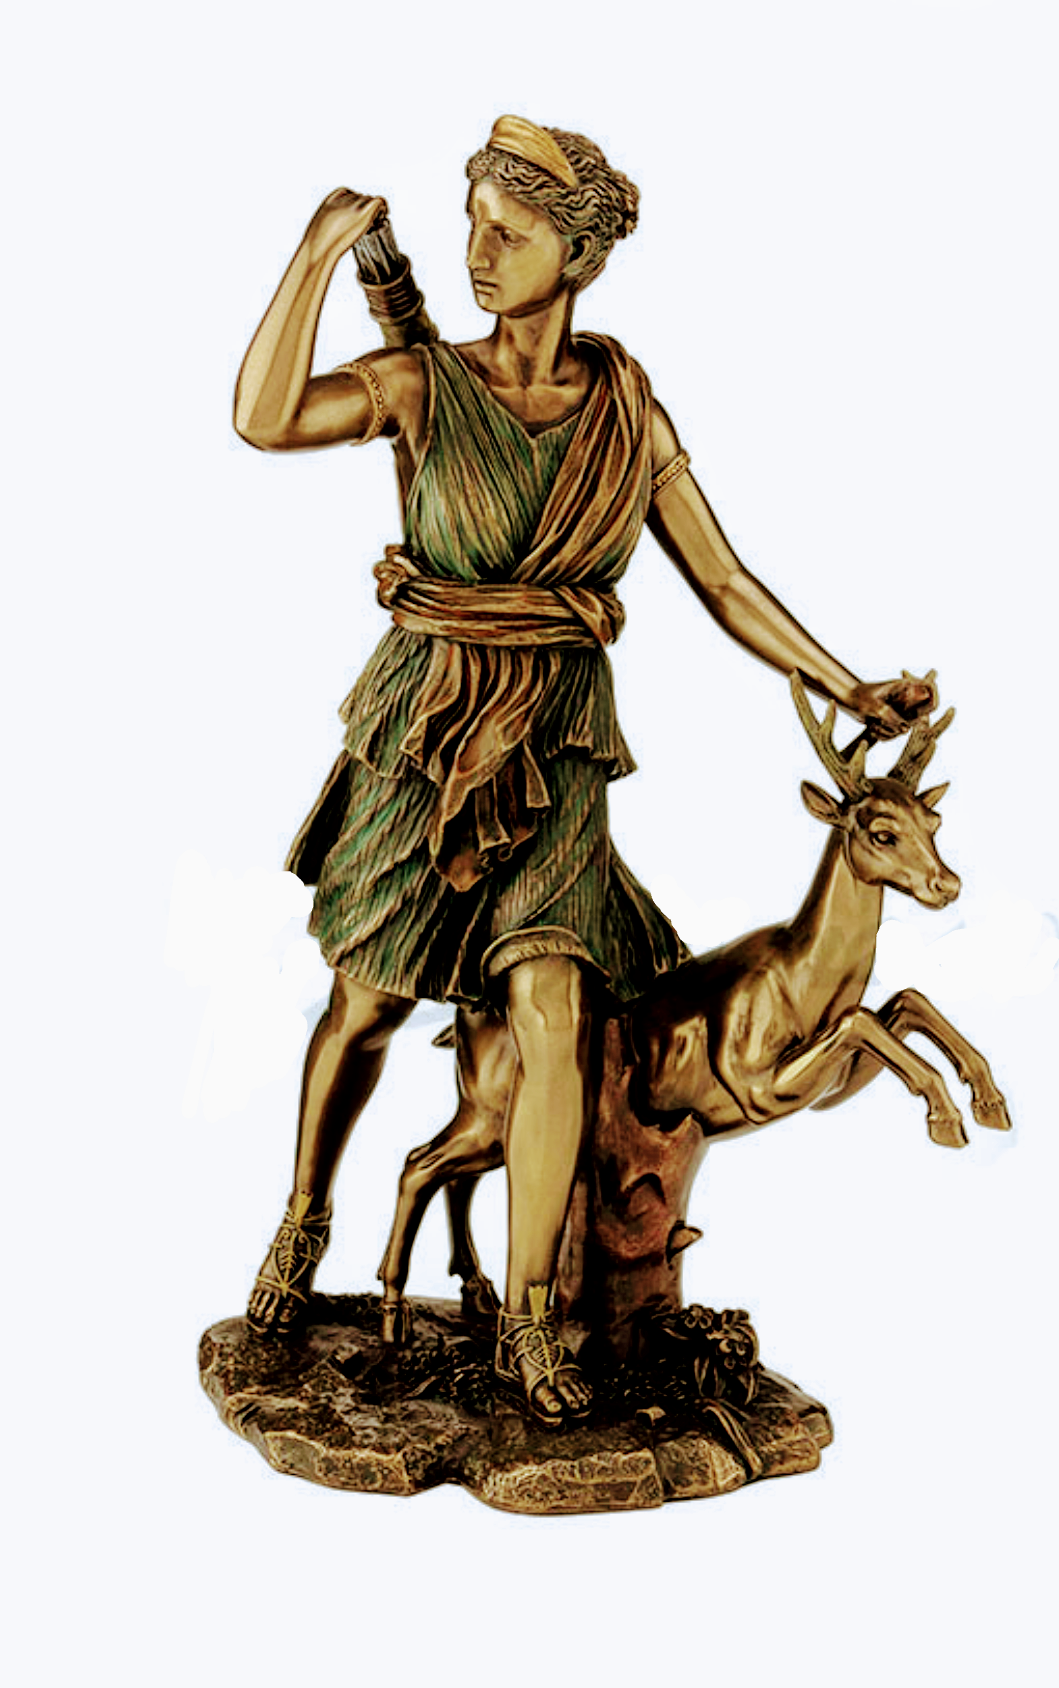 Diana With the Deer, Artemis (Hunt, Midwife, Virginity, Independence)